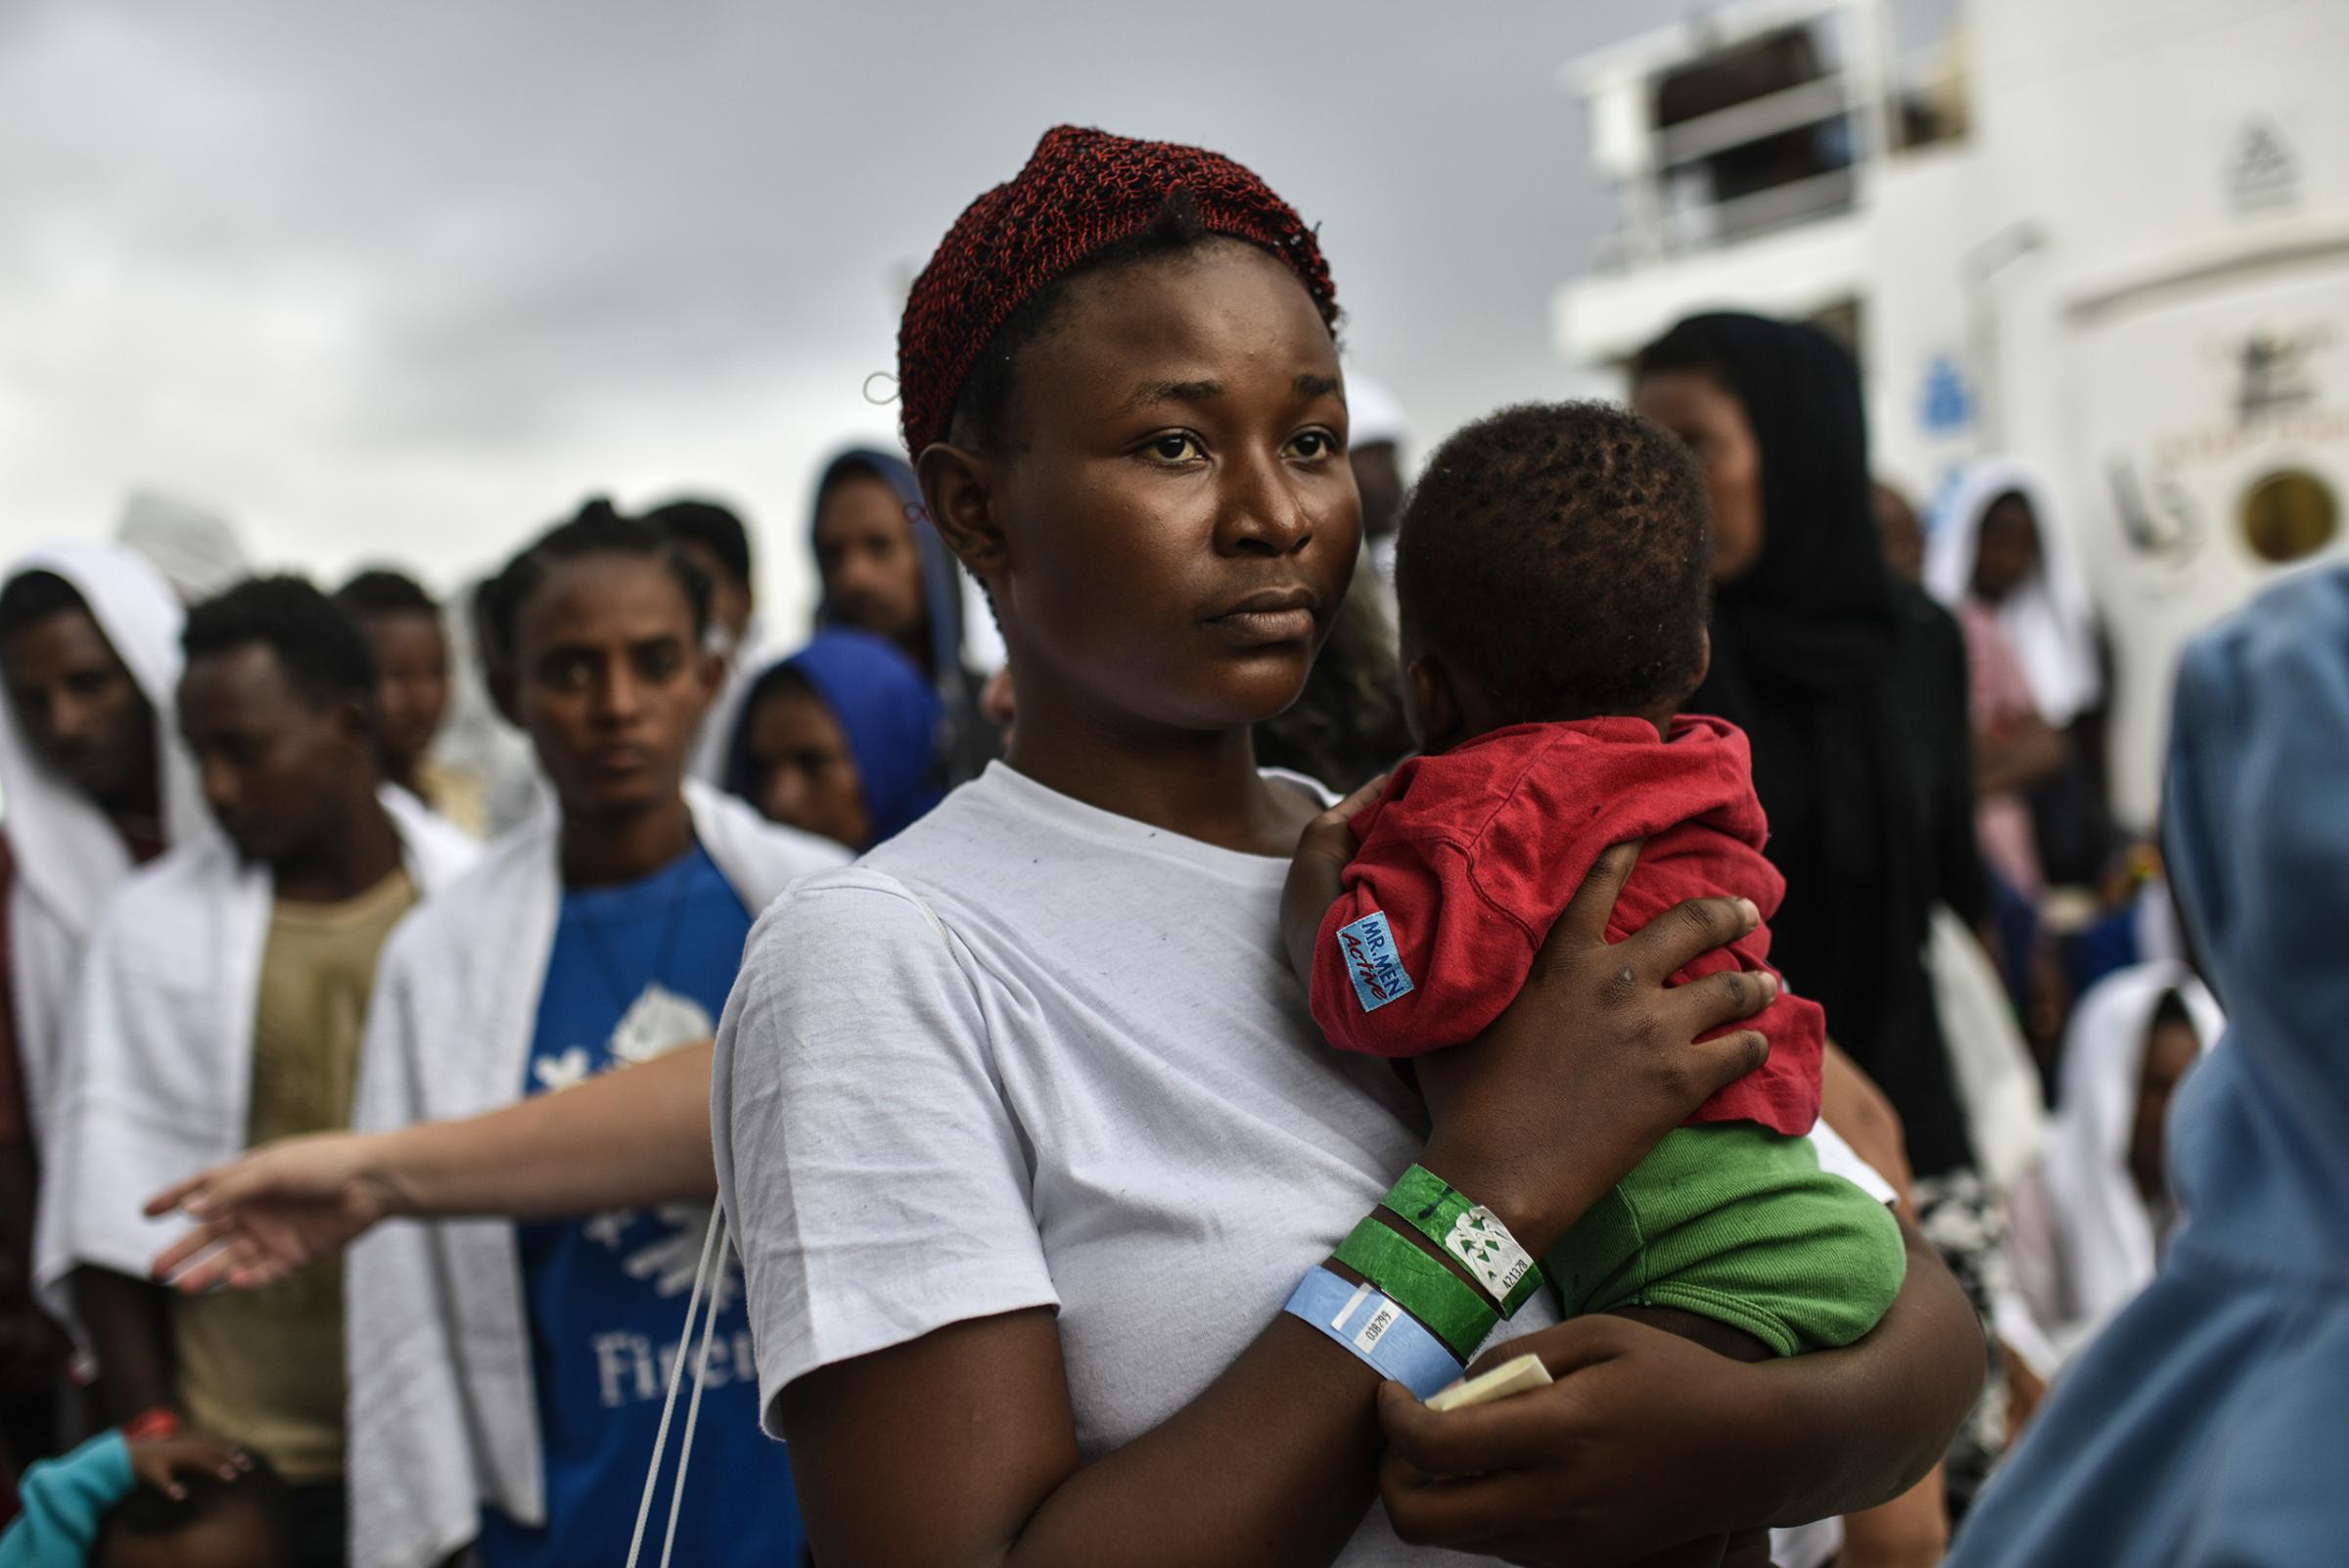 A Nigerian migrant, Goodness, age 20, holds her young daughter Destiny, as she waits to disembark at the Catania port, Sicily, Aug. 23, 2016.